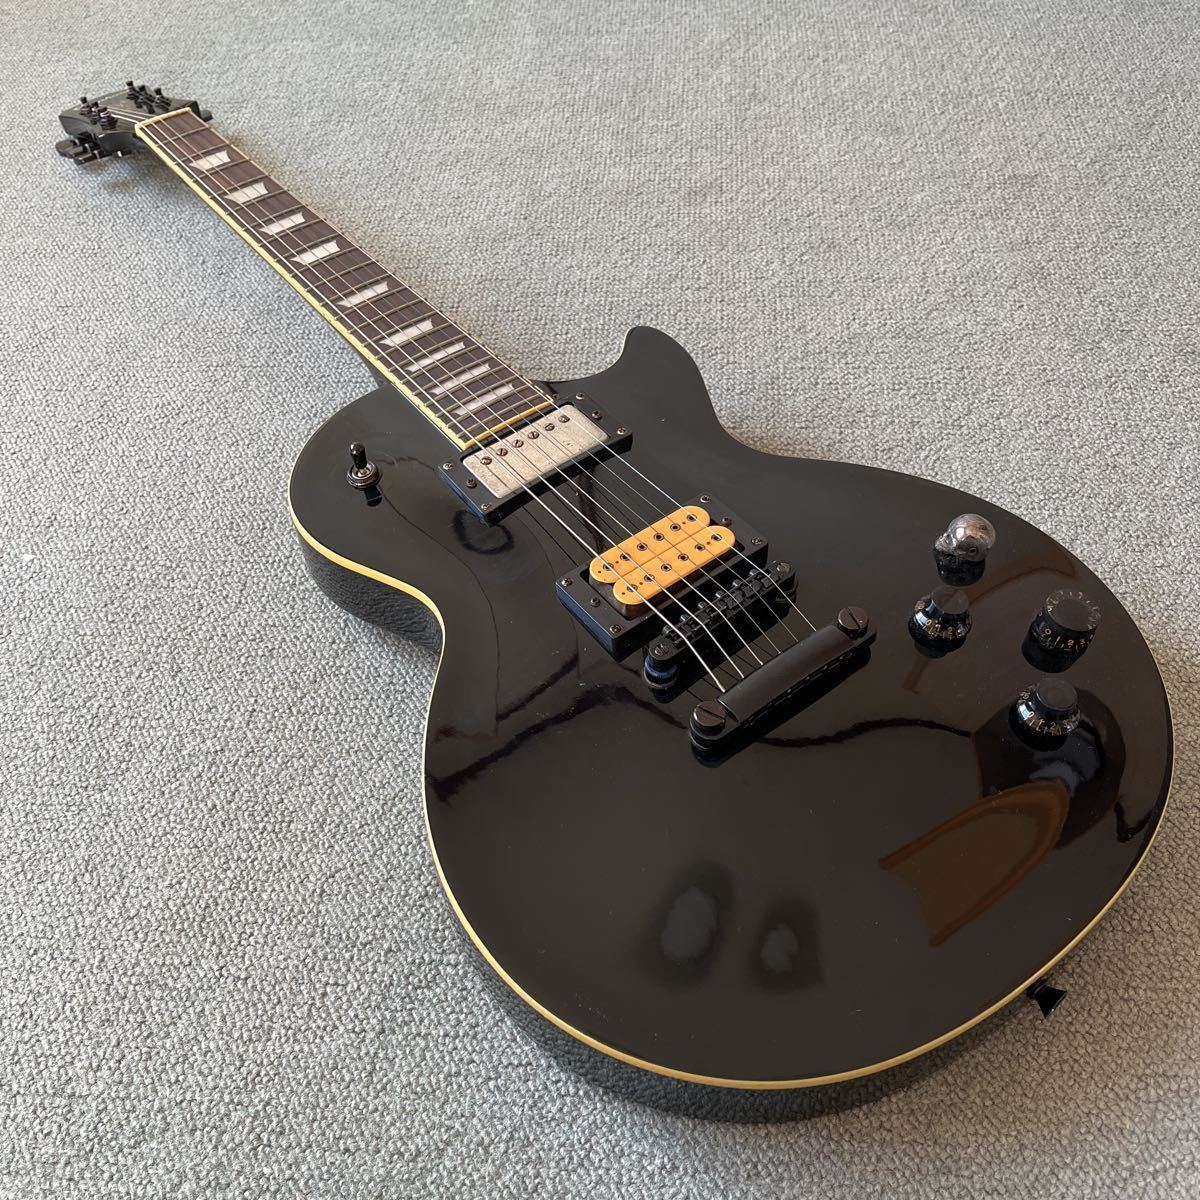 epiphone by Gibson Les Paul standard BLK 黒　エピフォン　ギブソン　レスポール　スタンダード　ジャンク　lespaul エレキギター_画像1